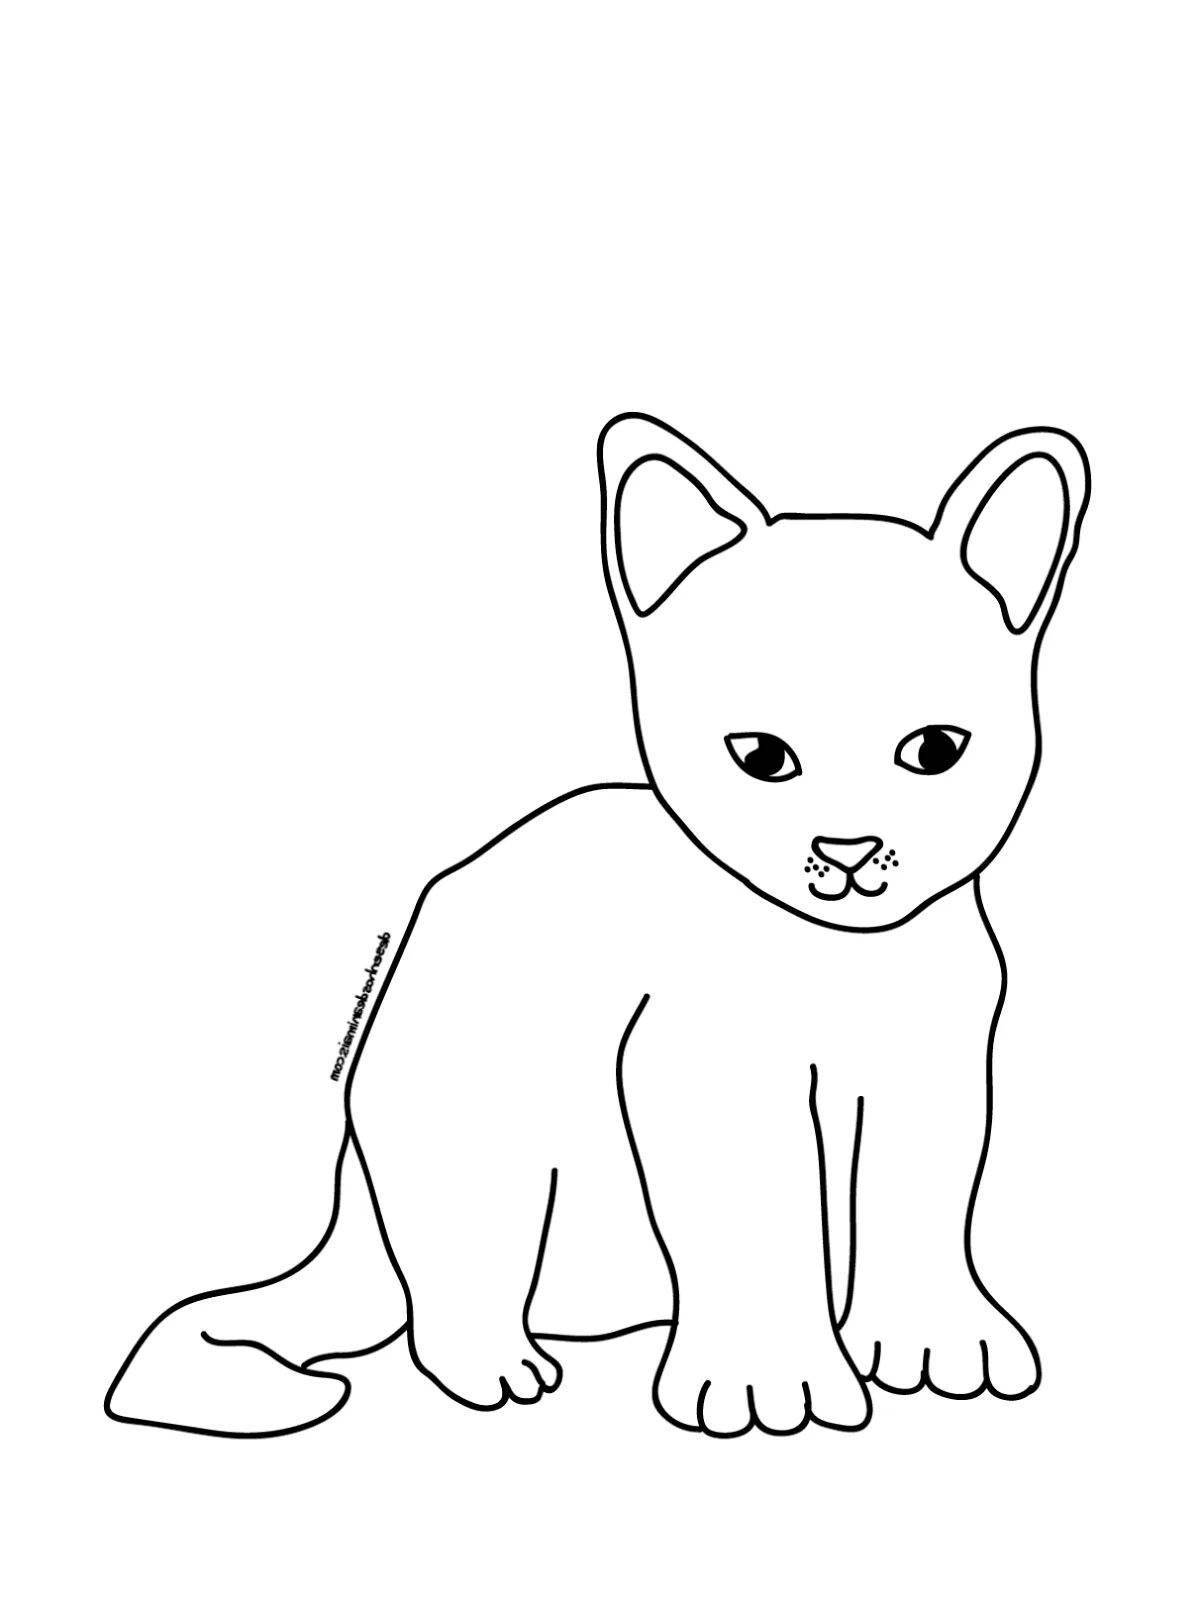 Coloring book playful Siamese cat